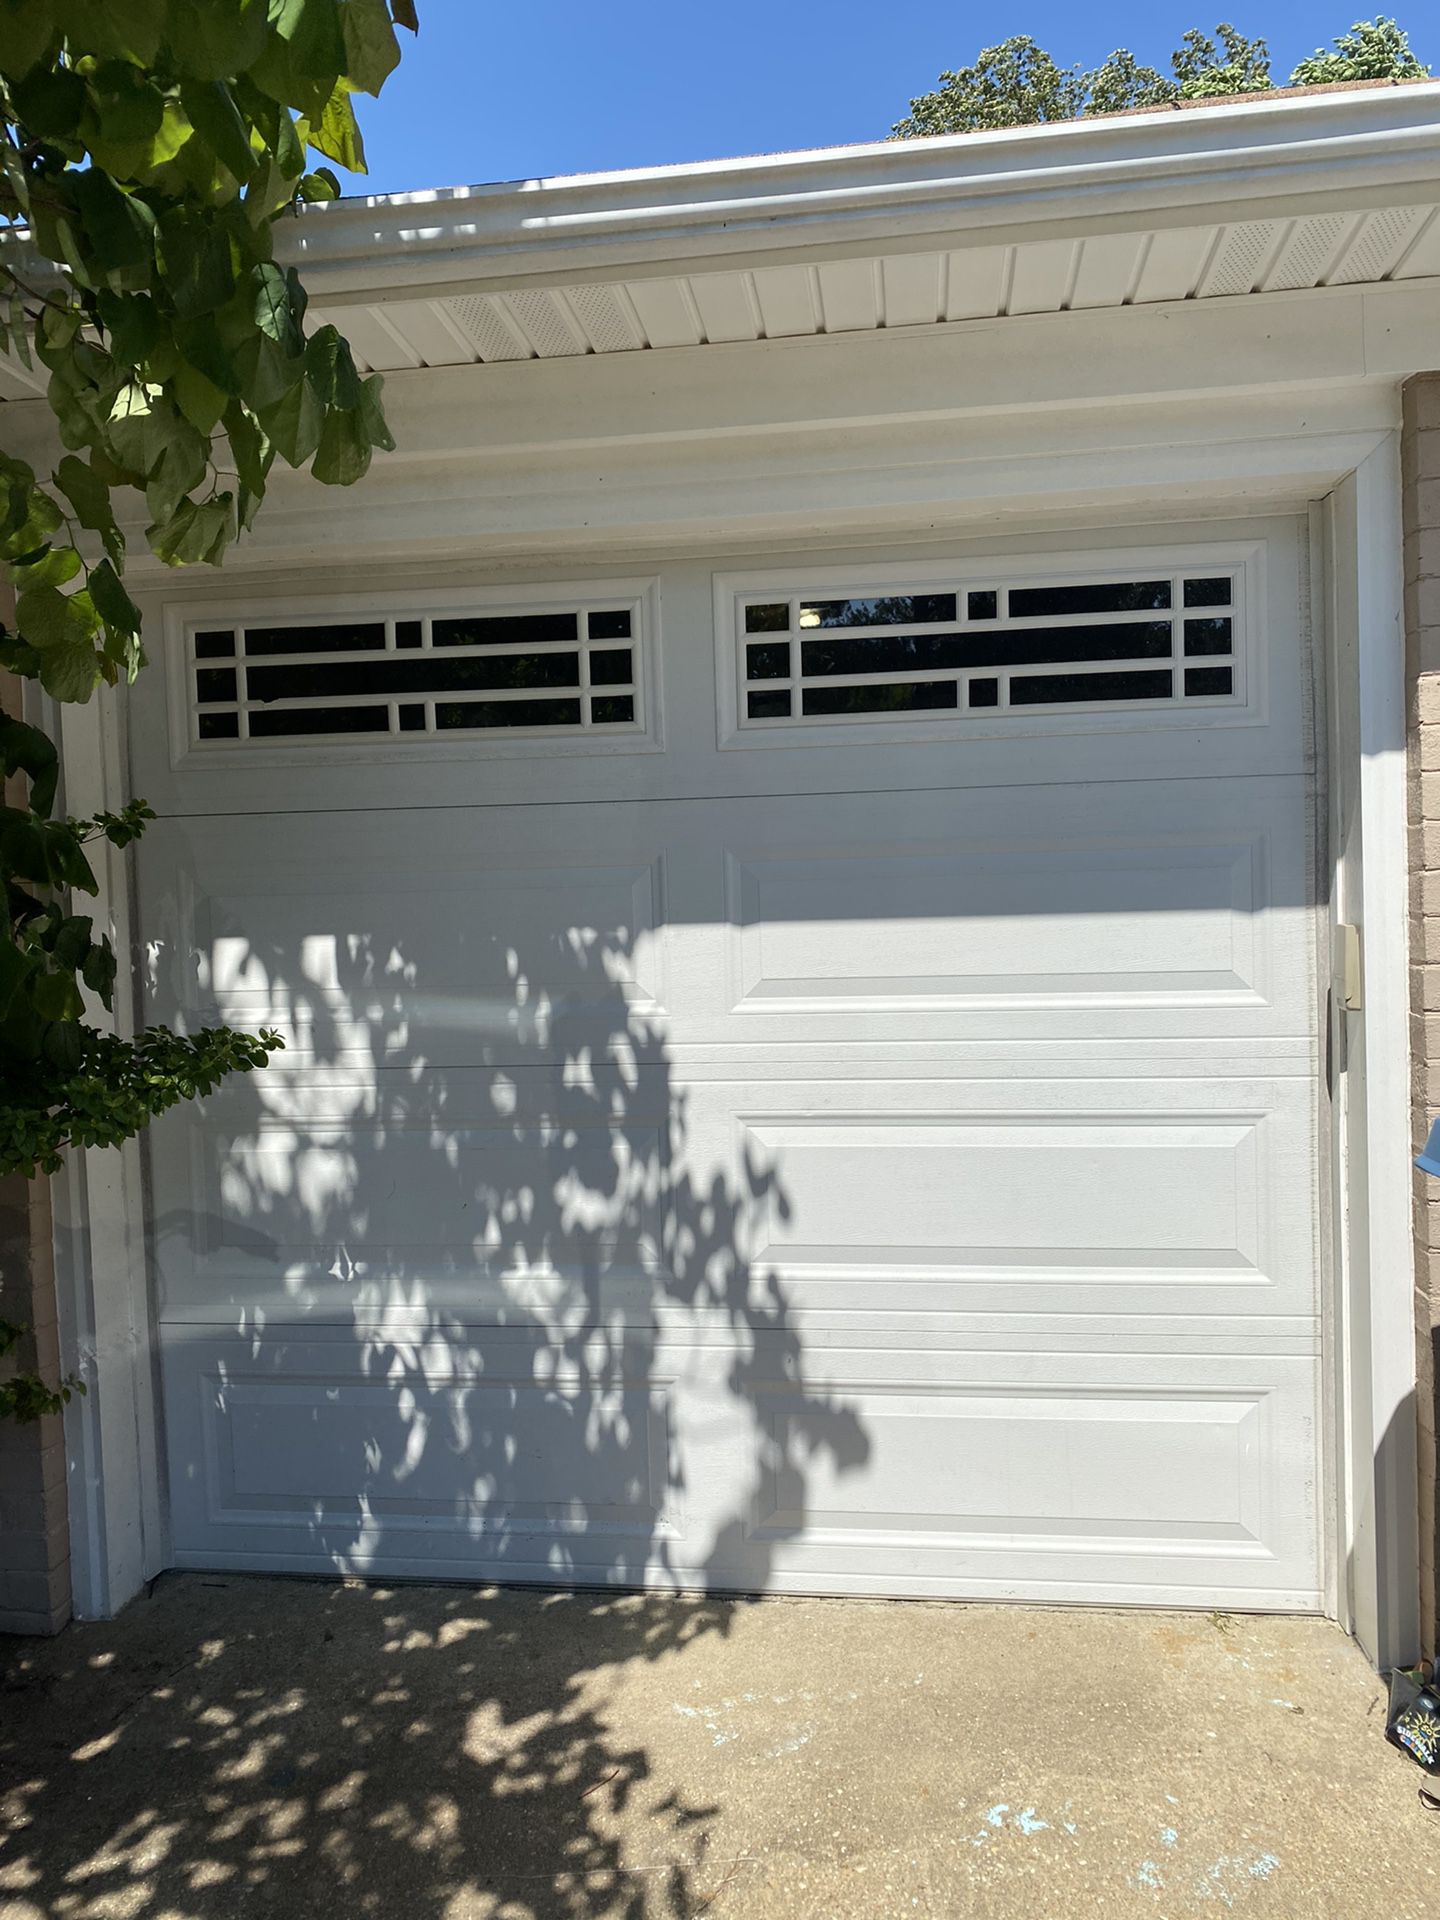 8x7 Insulated Single Garage Door with tracks and lift- working